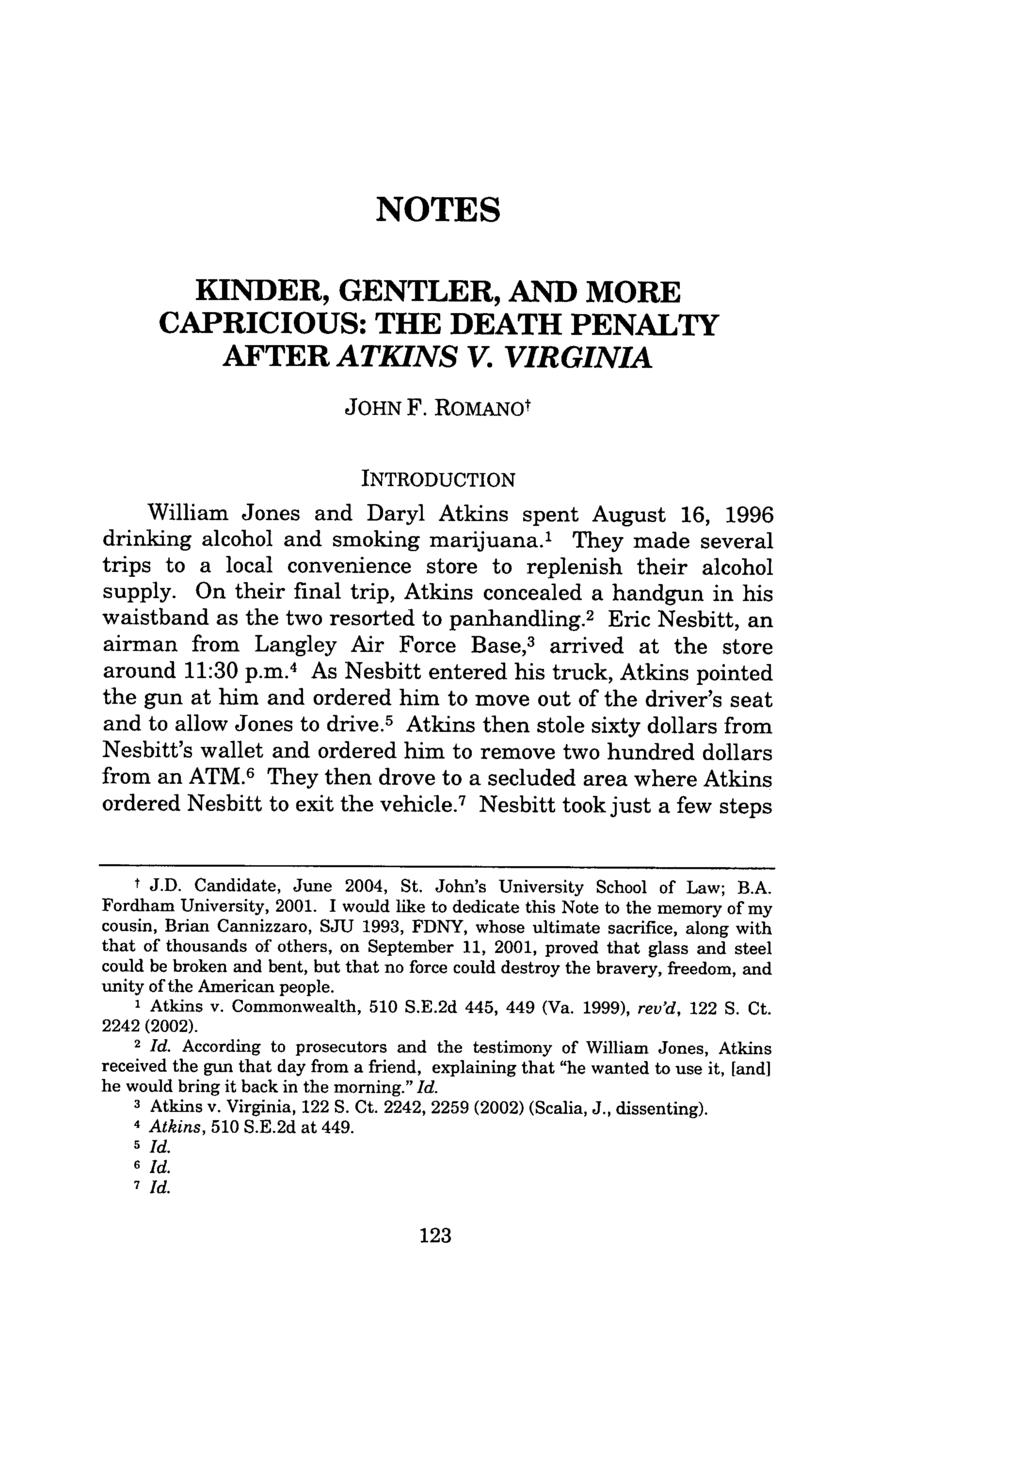 NOTES KINDER, GENTLER, AND MORE CAPRICIOUS: THE DEATH PENALTY AFTER ATKINS V. VIRGINIA JOHN F.